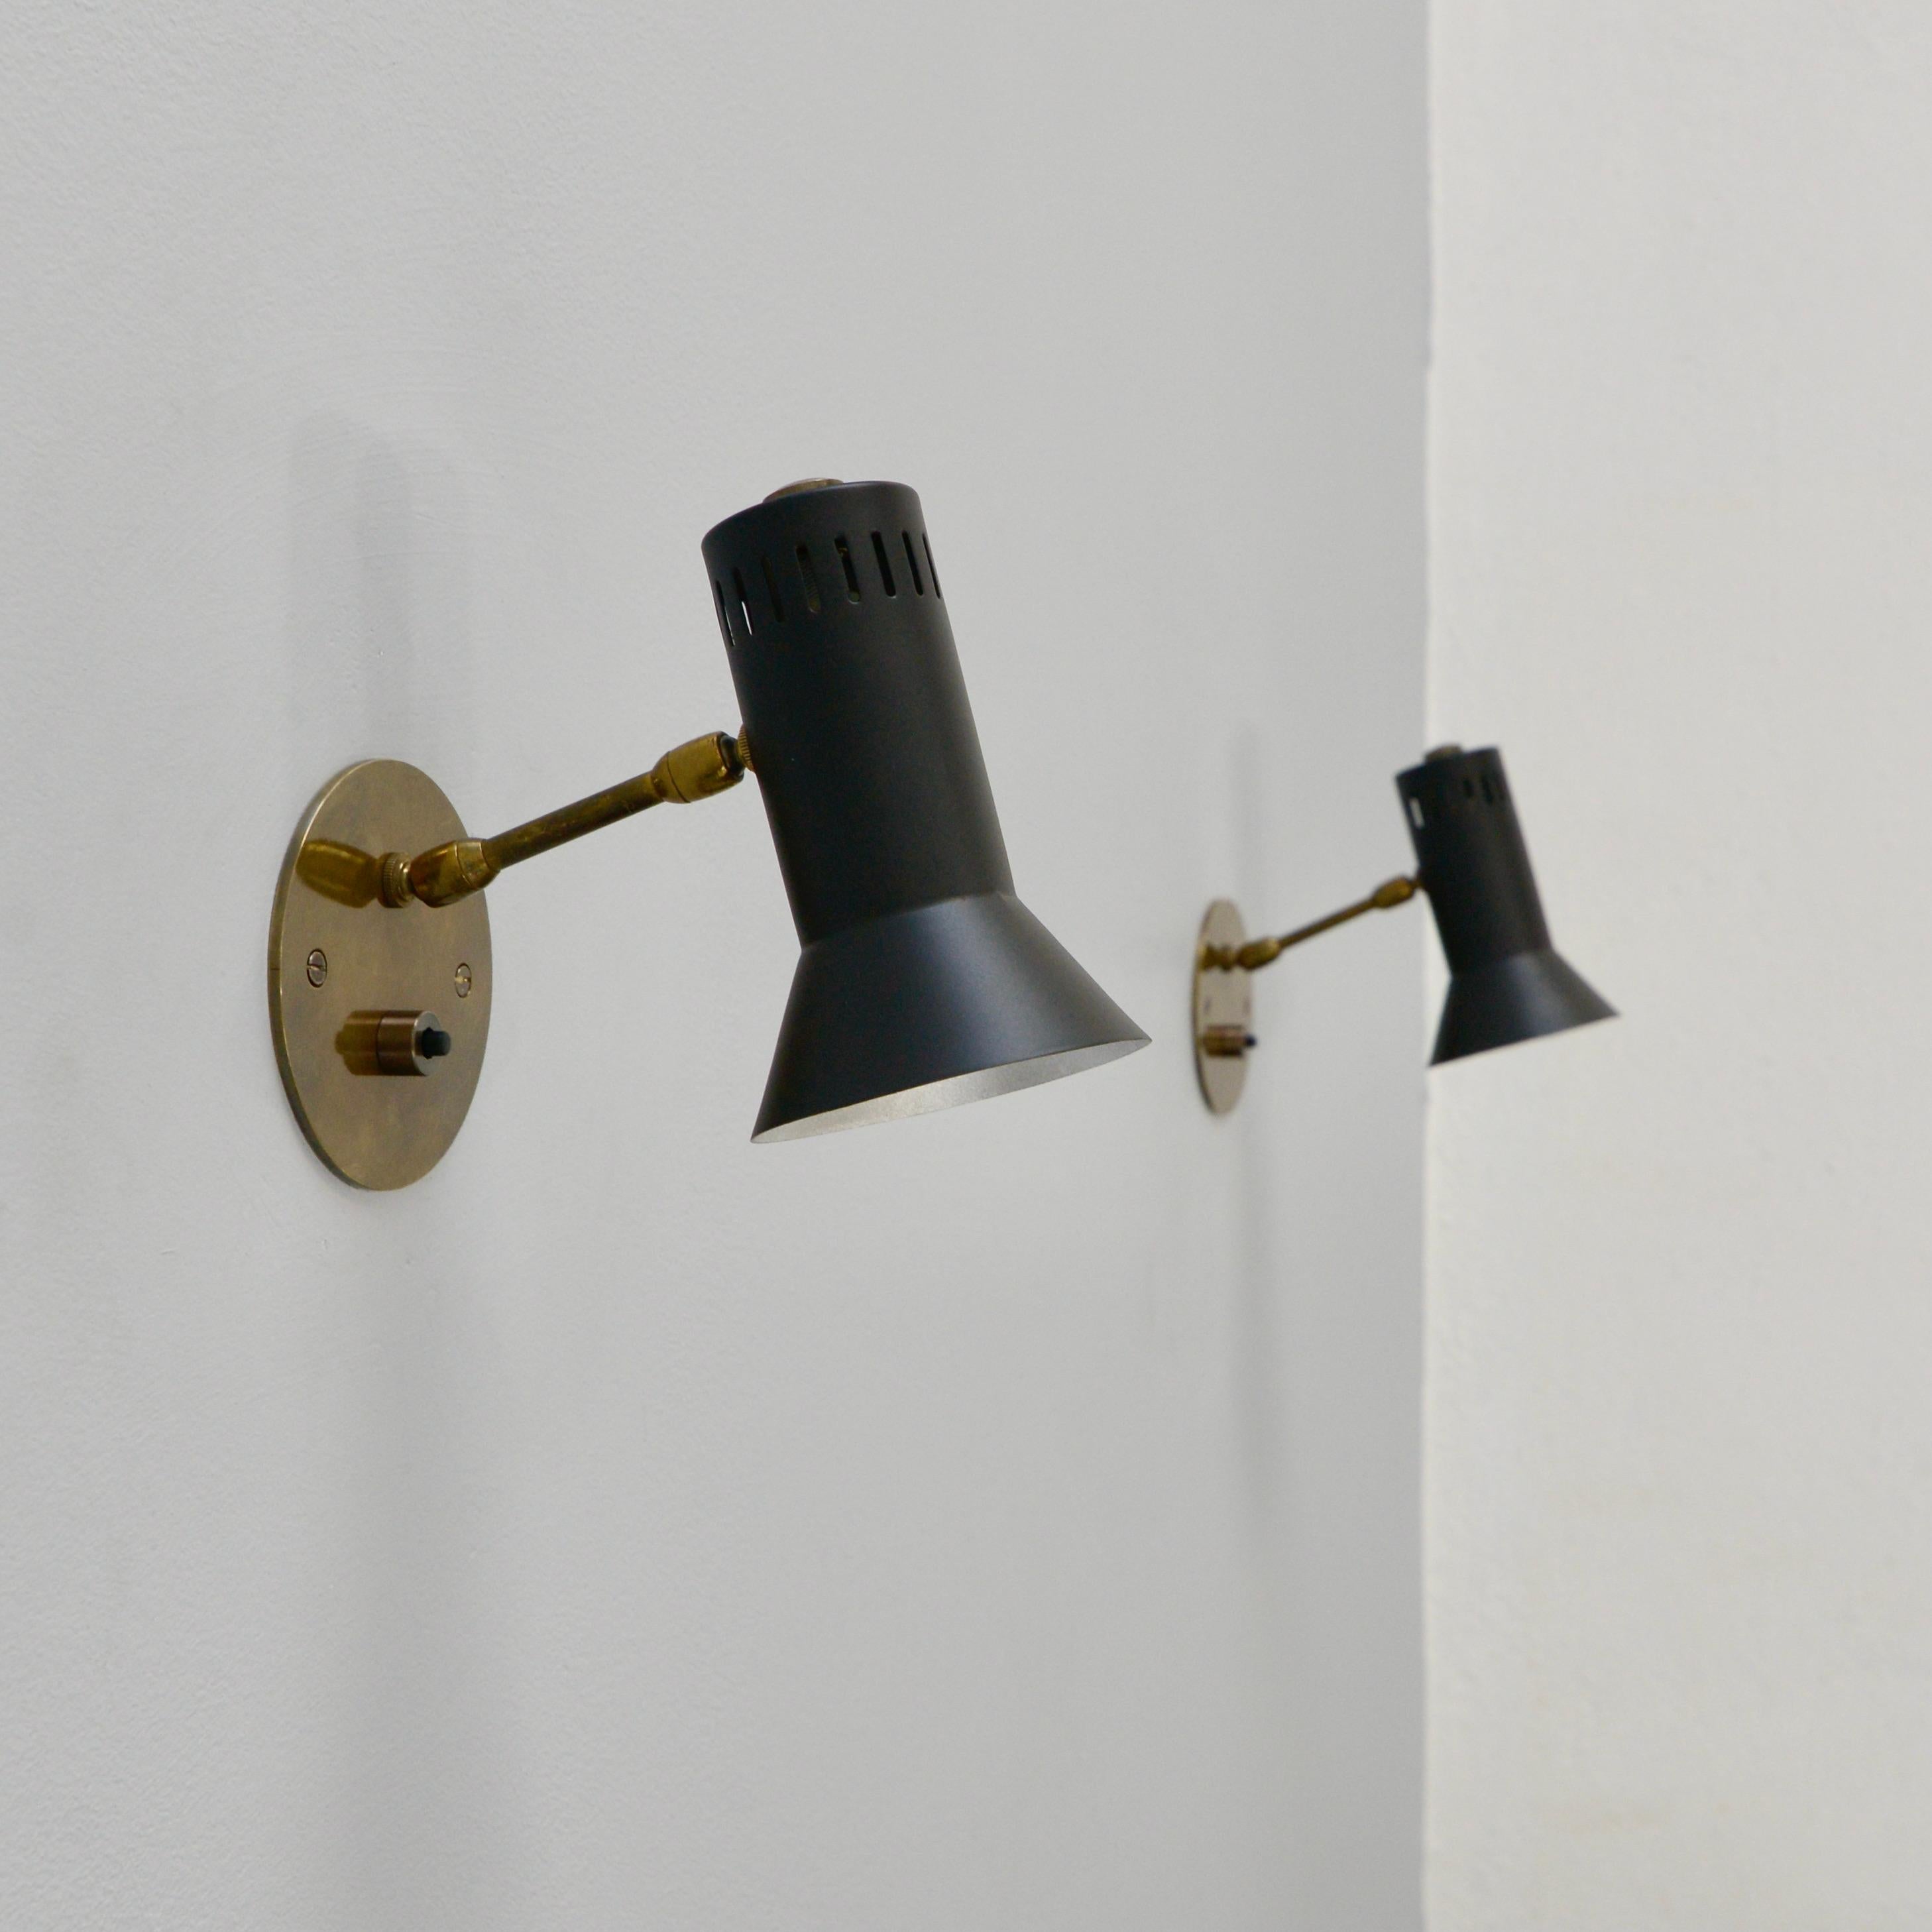 (7) partially restored aged brass and painted aluminum directional sconces from 1950s Italy. Arm and shade articulate in multiple directions. Slotted perforations allow for rich light quality. Wired with 1 E12 candelabra based socket for use in the